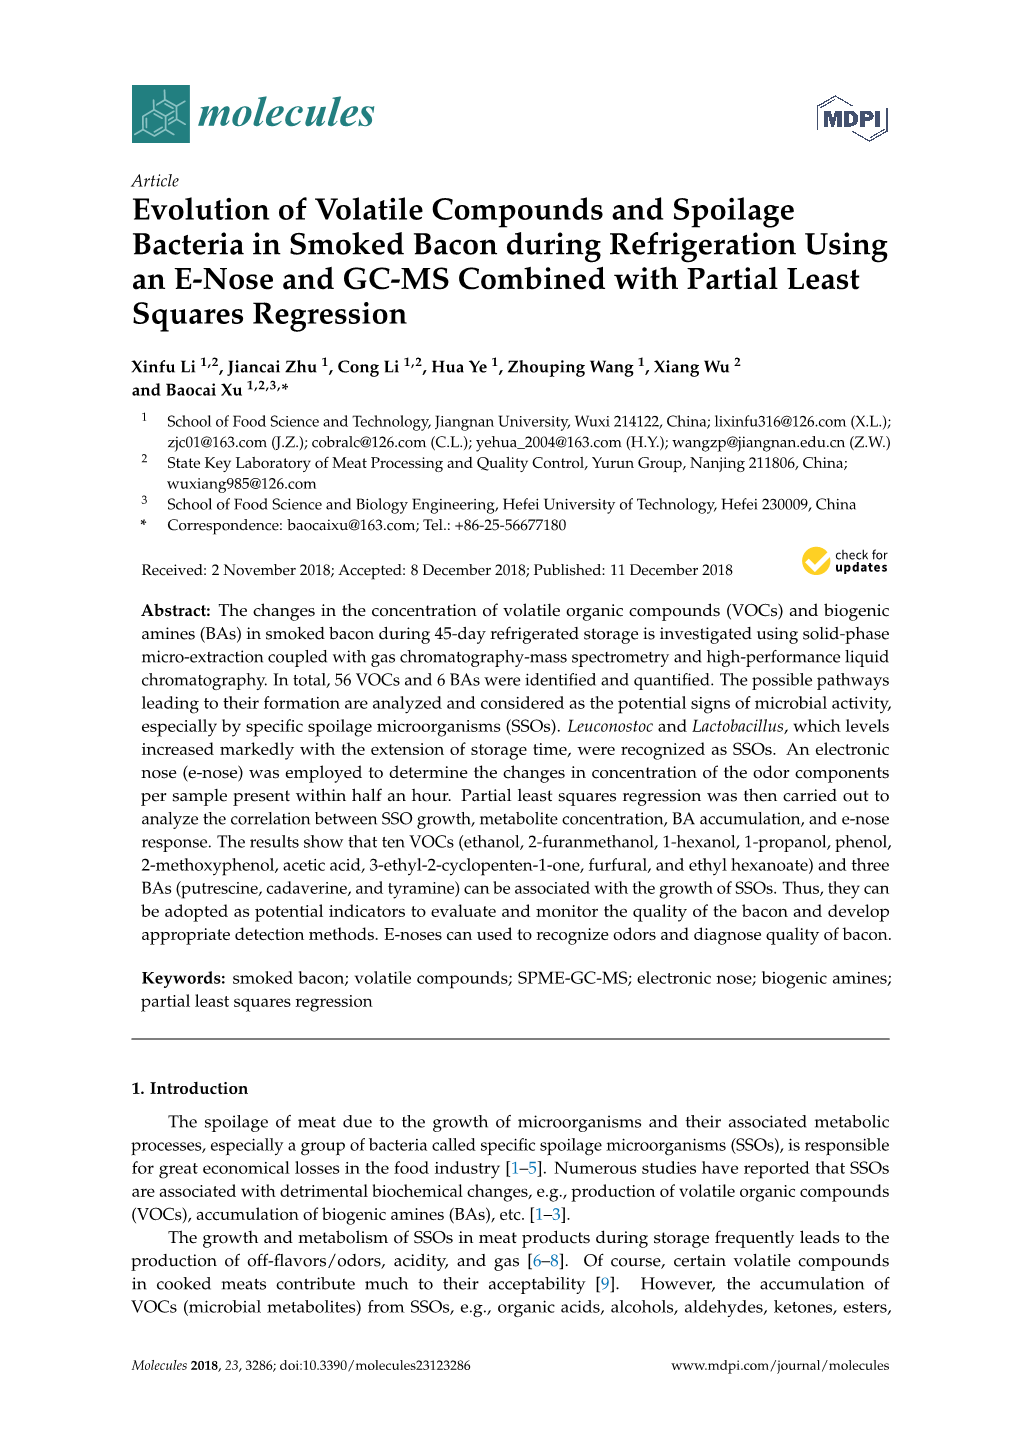 Evolution of Volatile Compounds and Spoilage Bacteria in Smoked Bacon During Refrigeration Using an E-Nose and GC-MS Combined with Partial Least Squares Regression